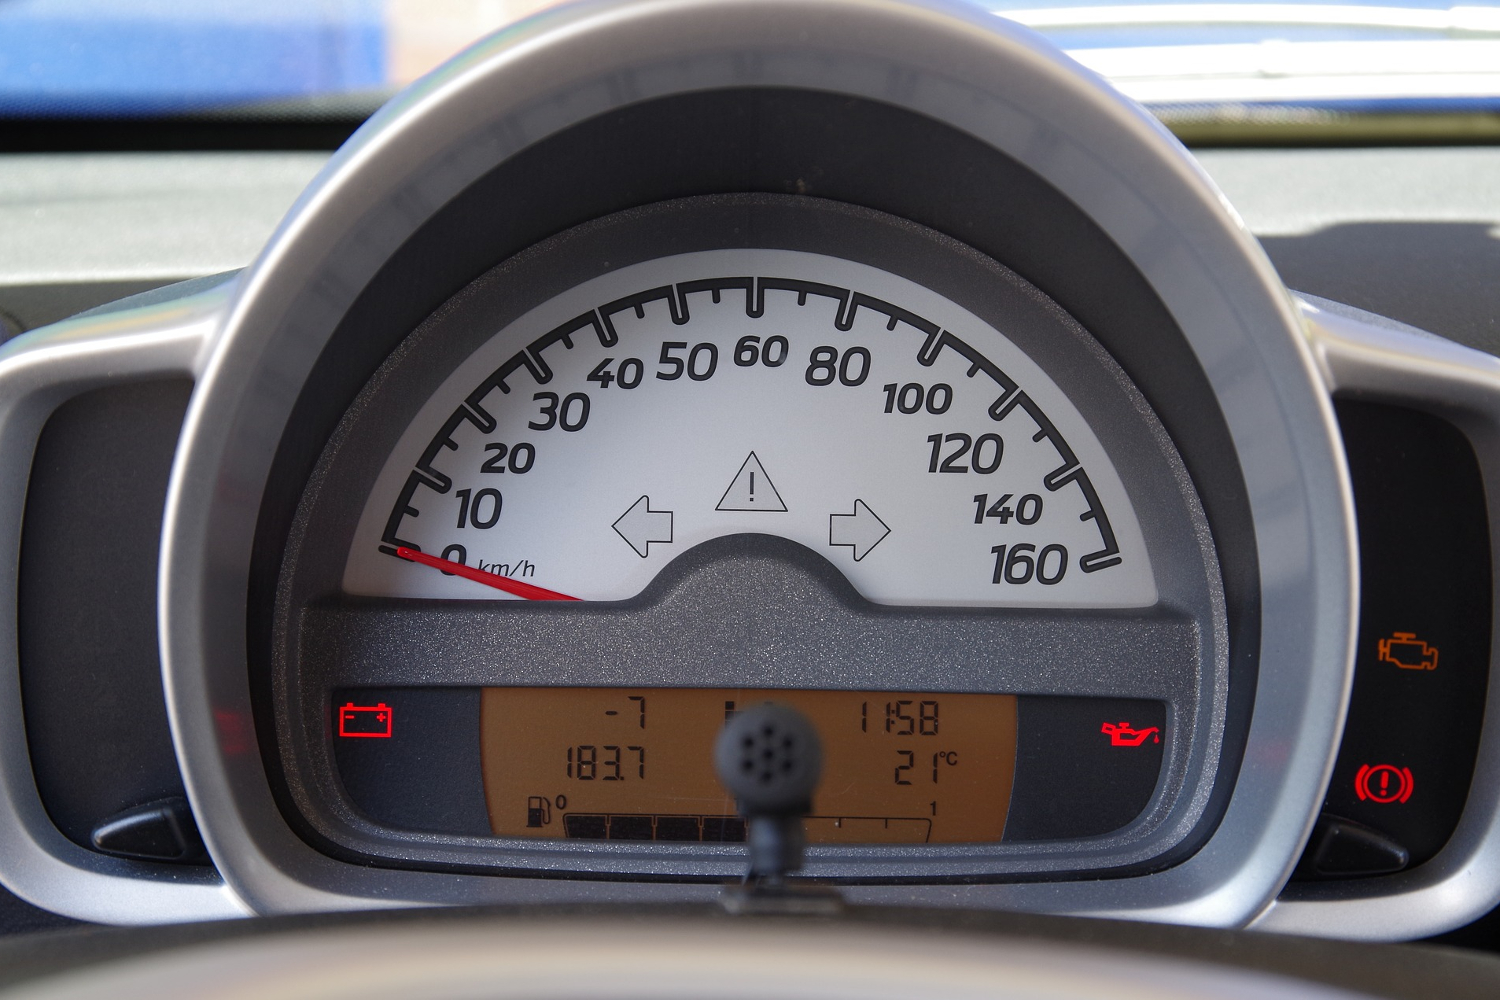 Check engine, tire pressure, and more: The most common car warning